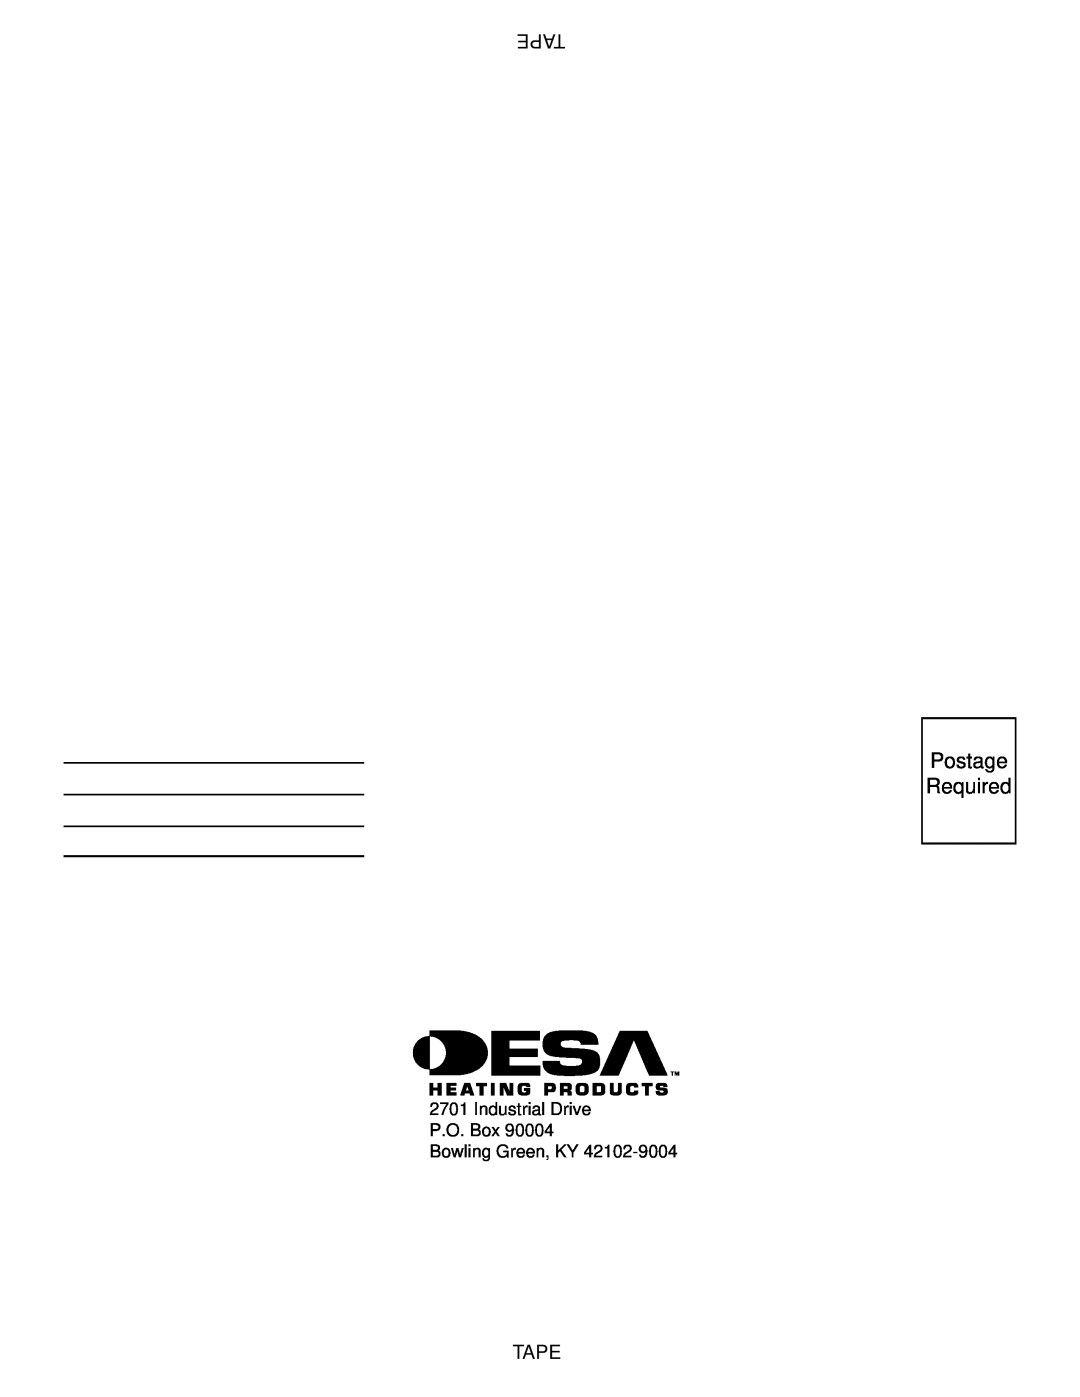 Desa SGS3124N, CLD3018PT, CLD3018NT, SGS3124P installation manual Postage Required, Tape 